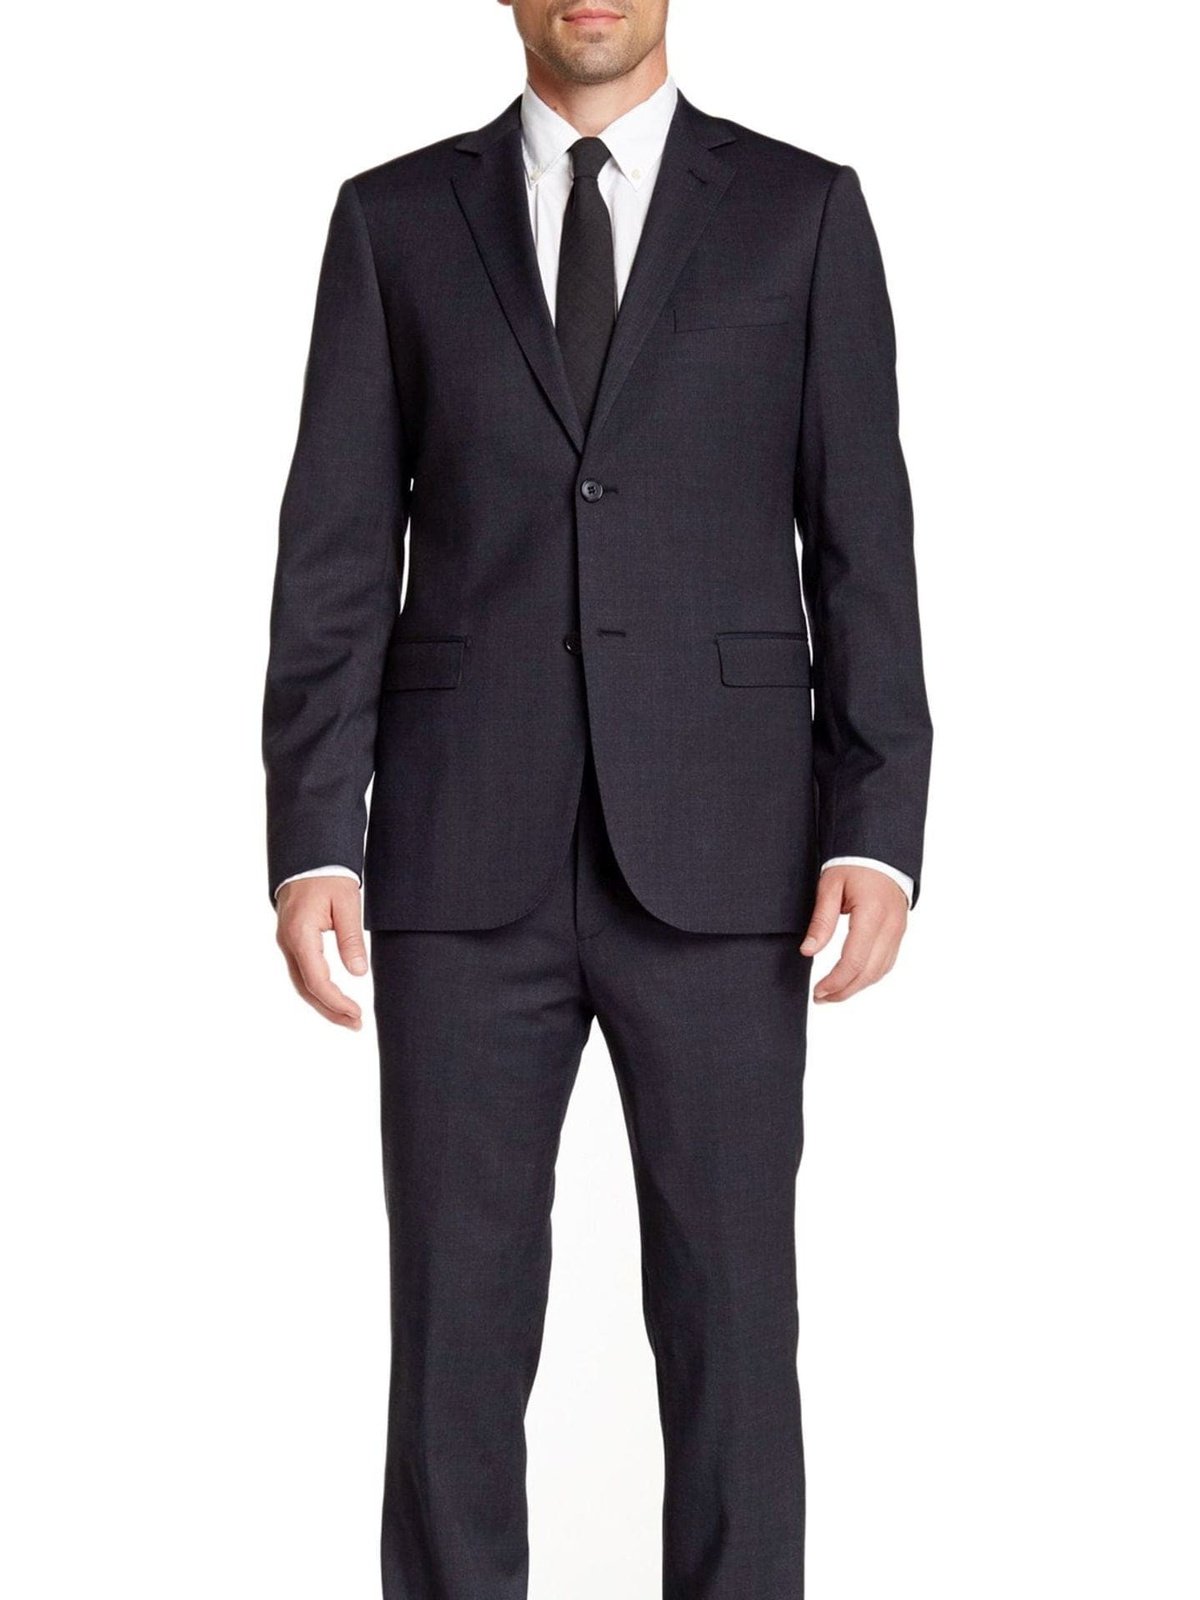 Zanetti Sale Suits Zanetti Slim Fit Navy Blue Pinstriped Two Button Stretch Wool Suit